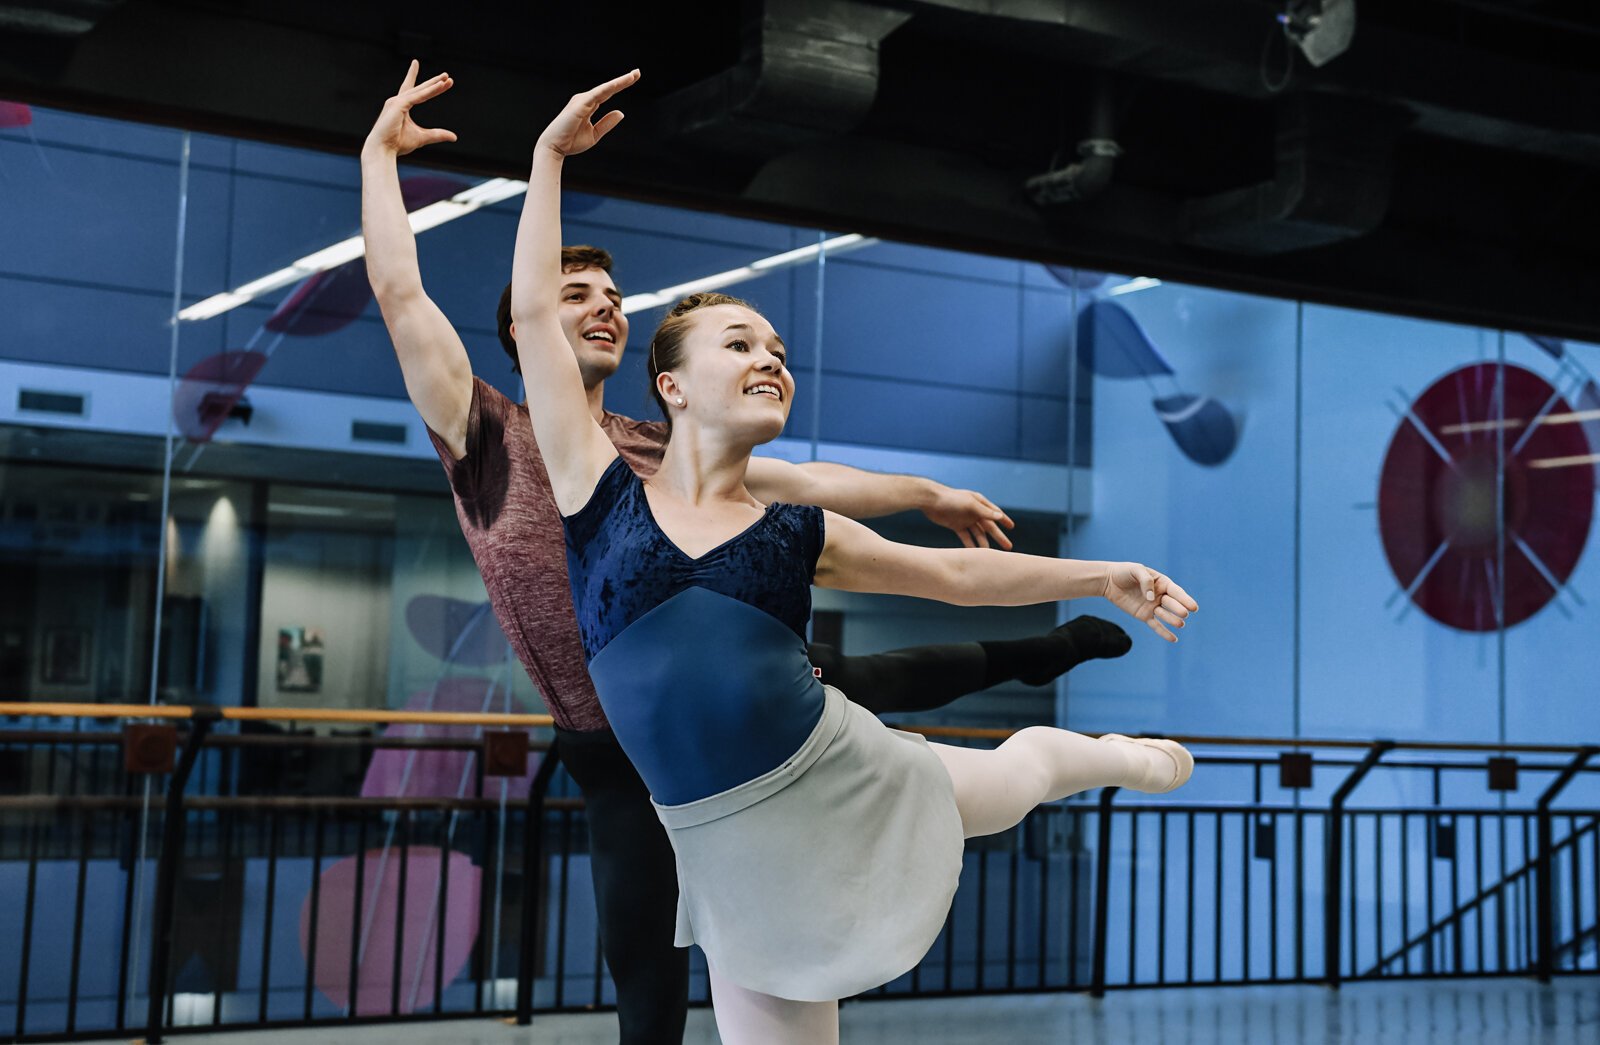 Fort Wayne Ballet's Talbot Rue and dancing partner Abby Zinsser practice the piece "Spring Waters" during a rehearsal at The Auer Center.